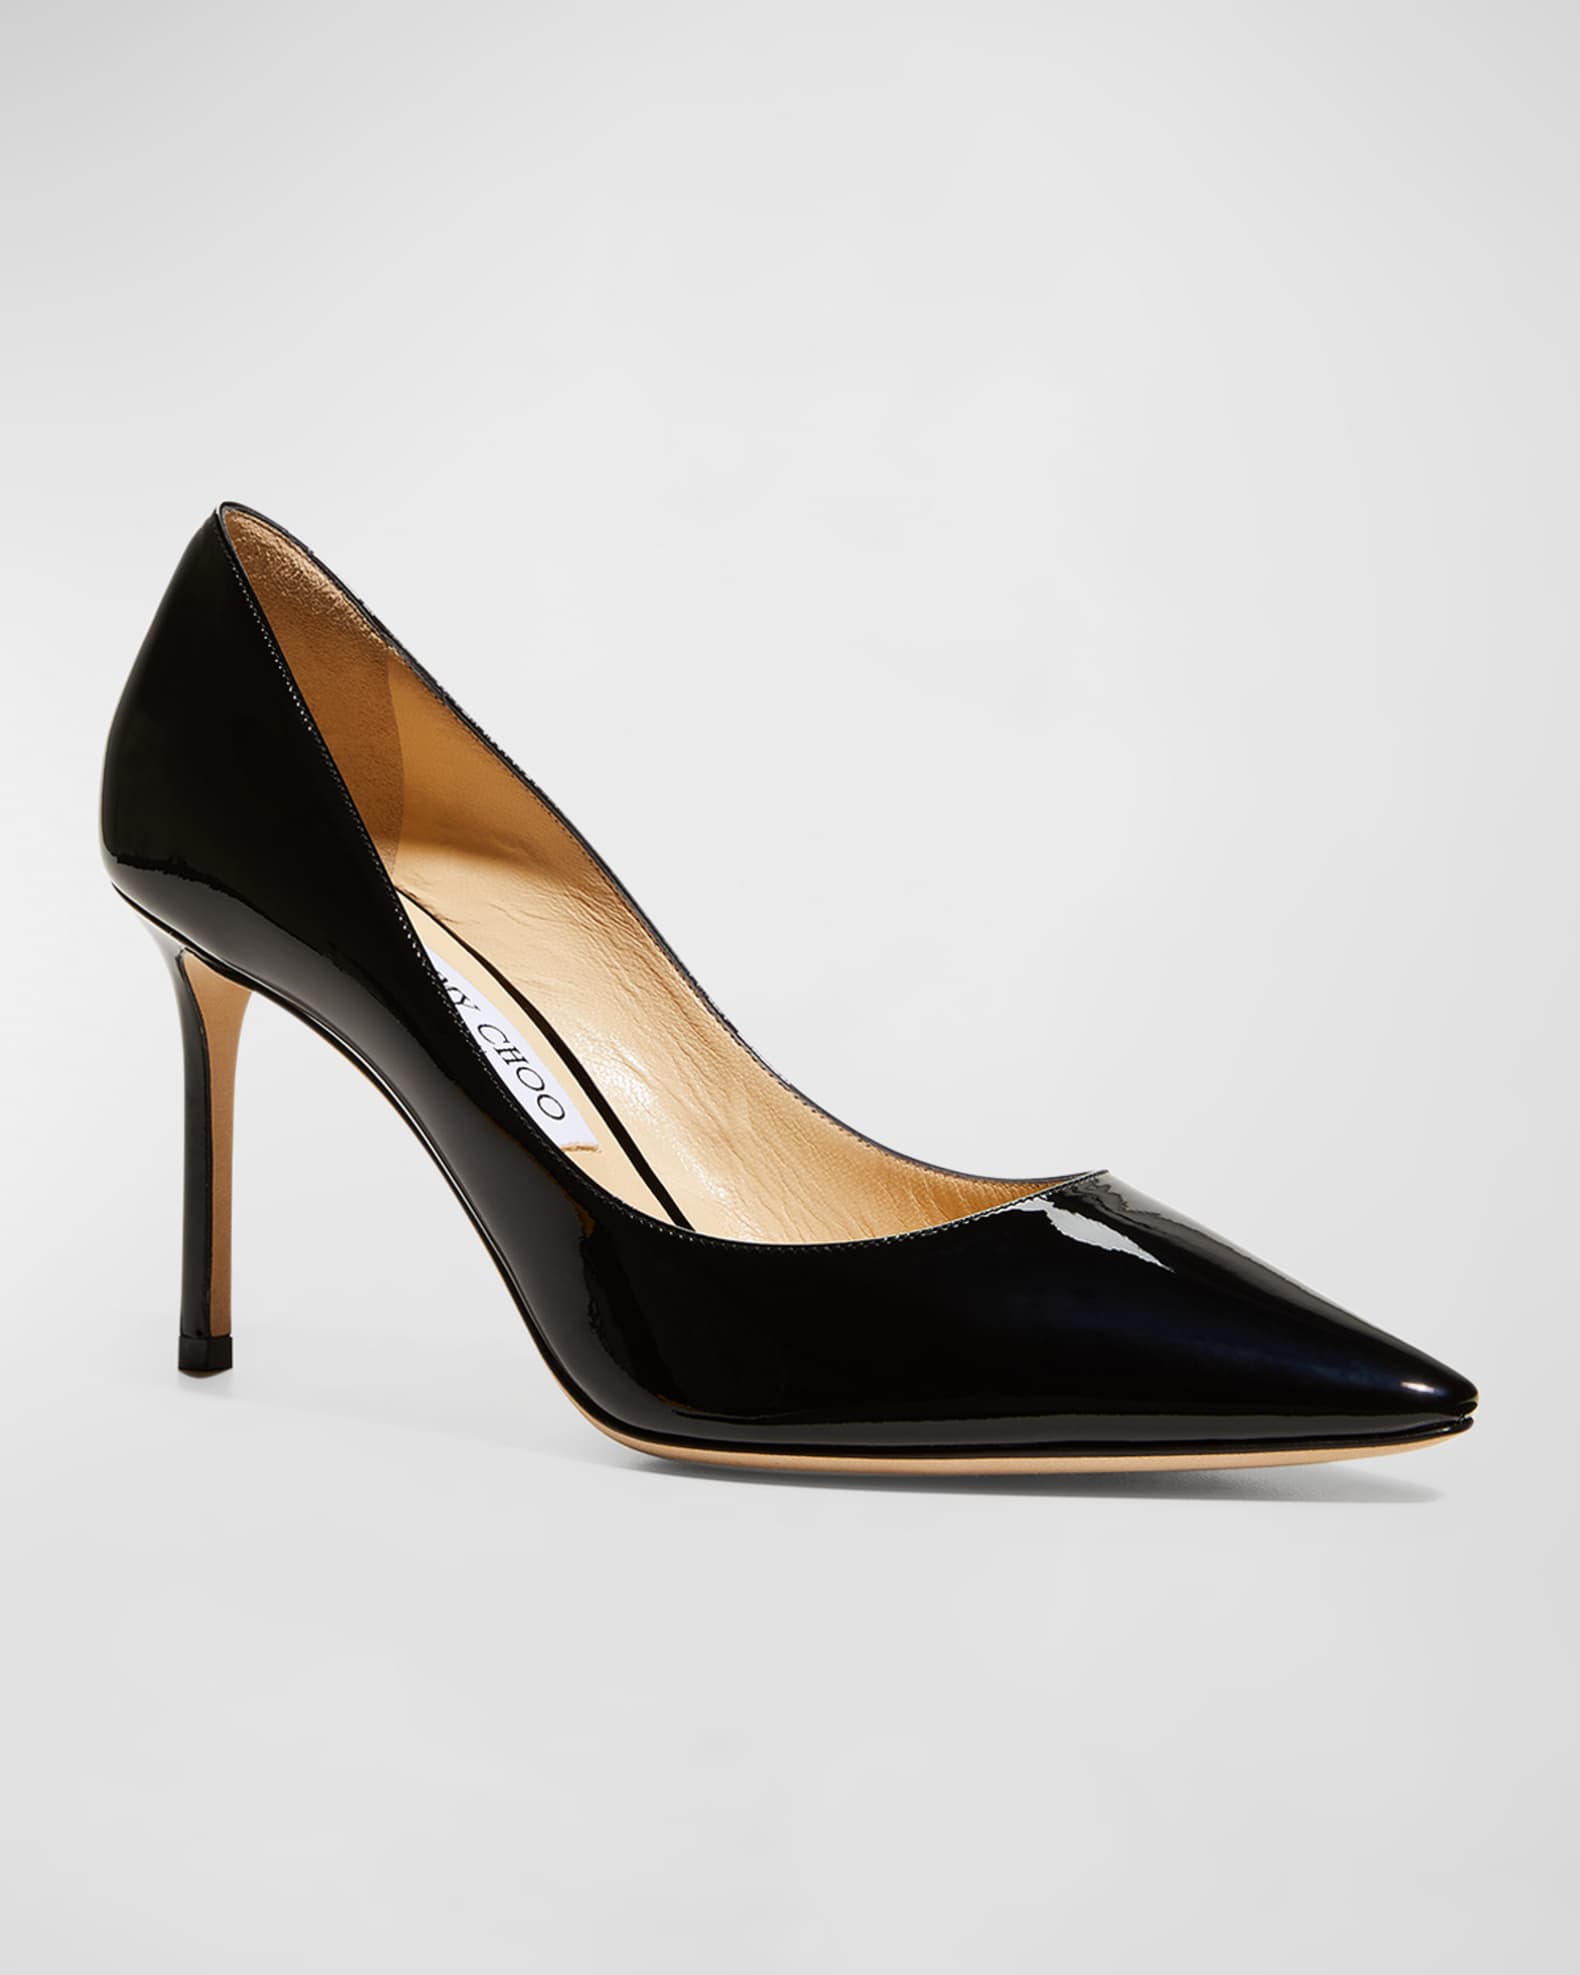 Jimmy Choo Romy Patent Pointed-Toe 85mm Pumps | Neiman Marcus